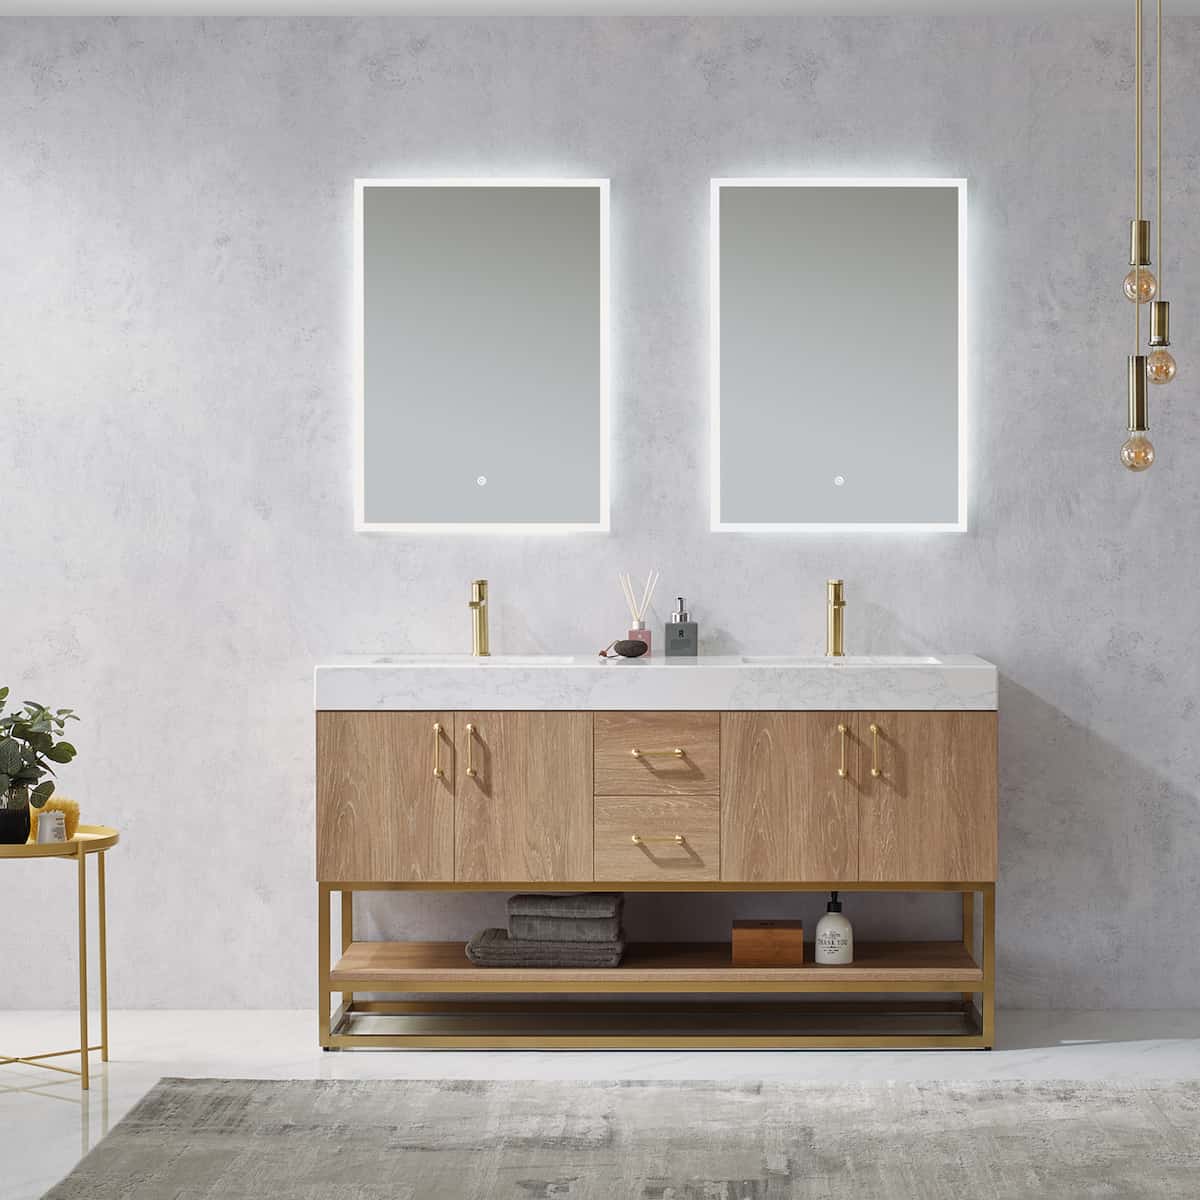 Vinnova Alistair 60 Inch Freestanding Double Vanity in North American Oak and Brushed Gold Frame with White Grain Stone Countertop With Mirrors in Bathroom 789060-NO-GW